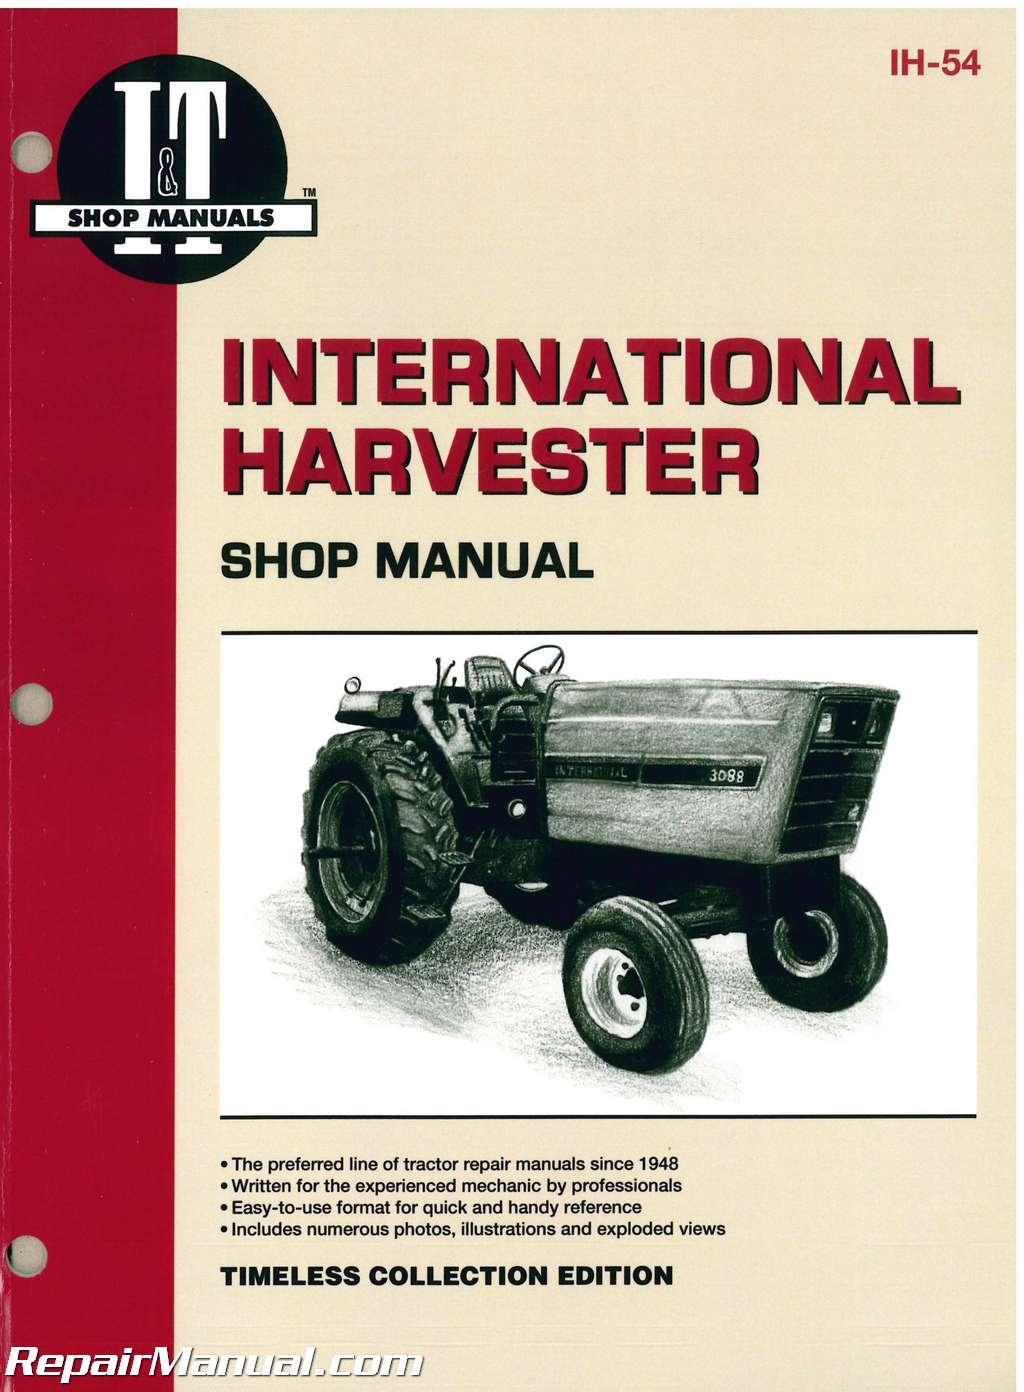 Tractor Hydro Service Manual for International Harvester 86